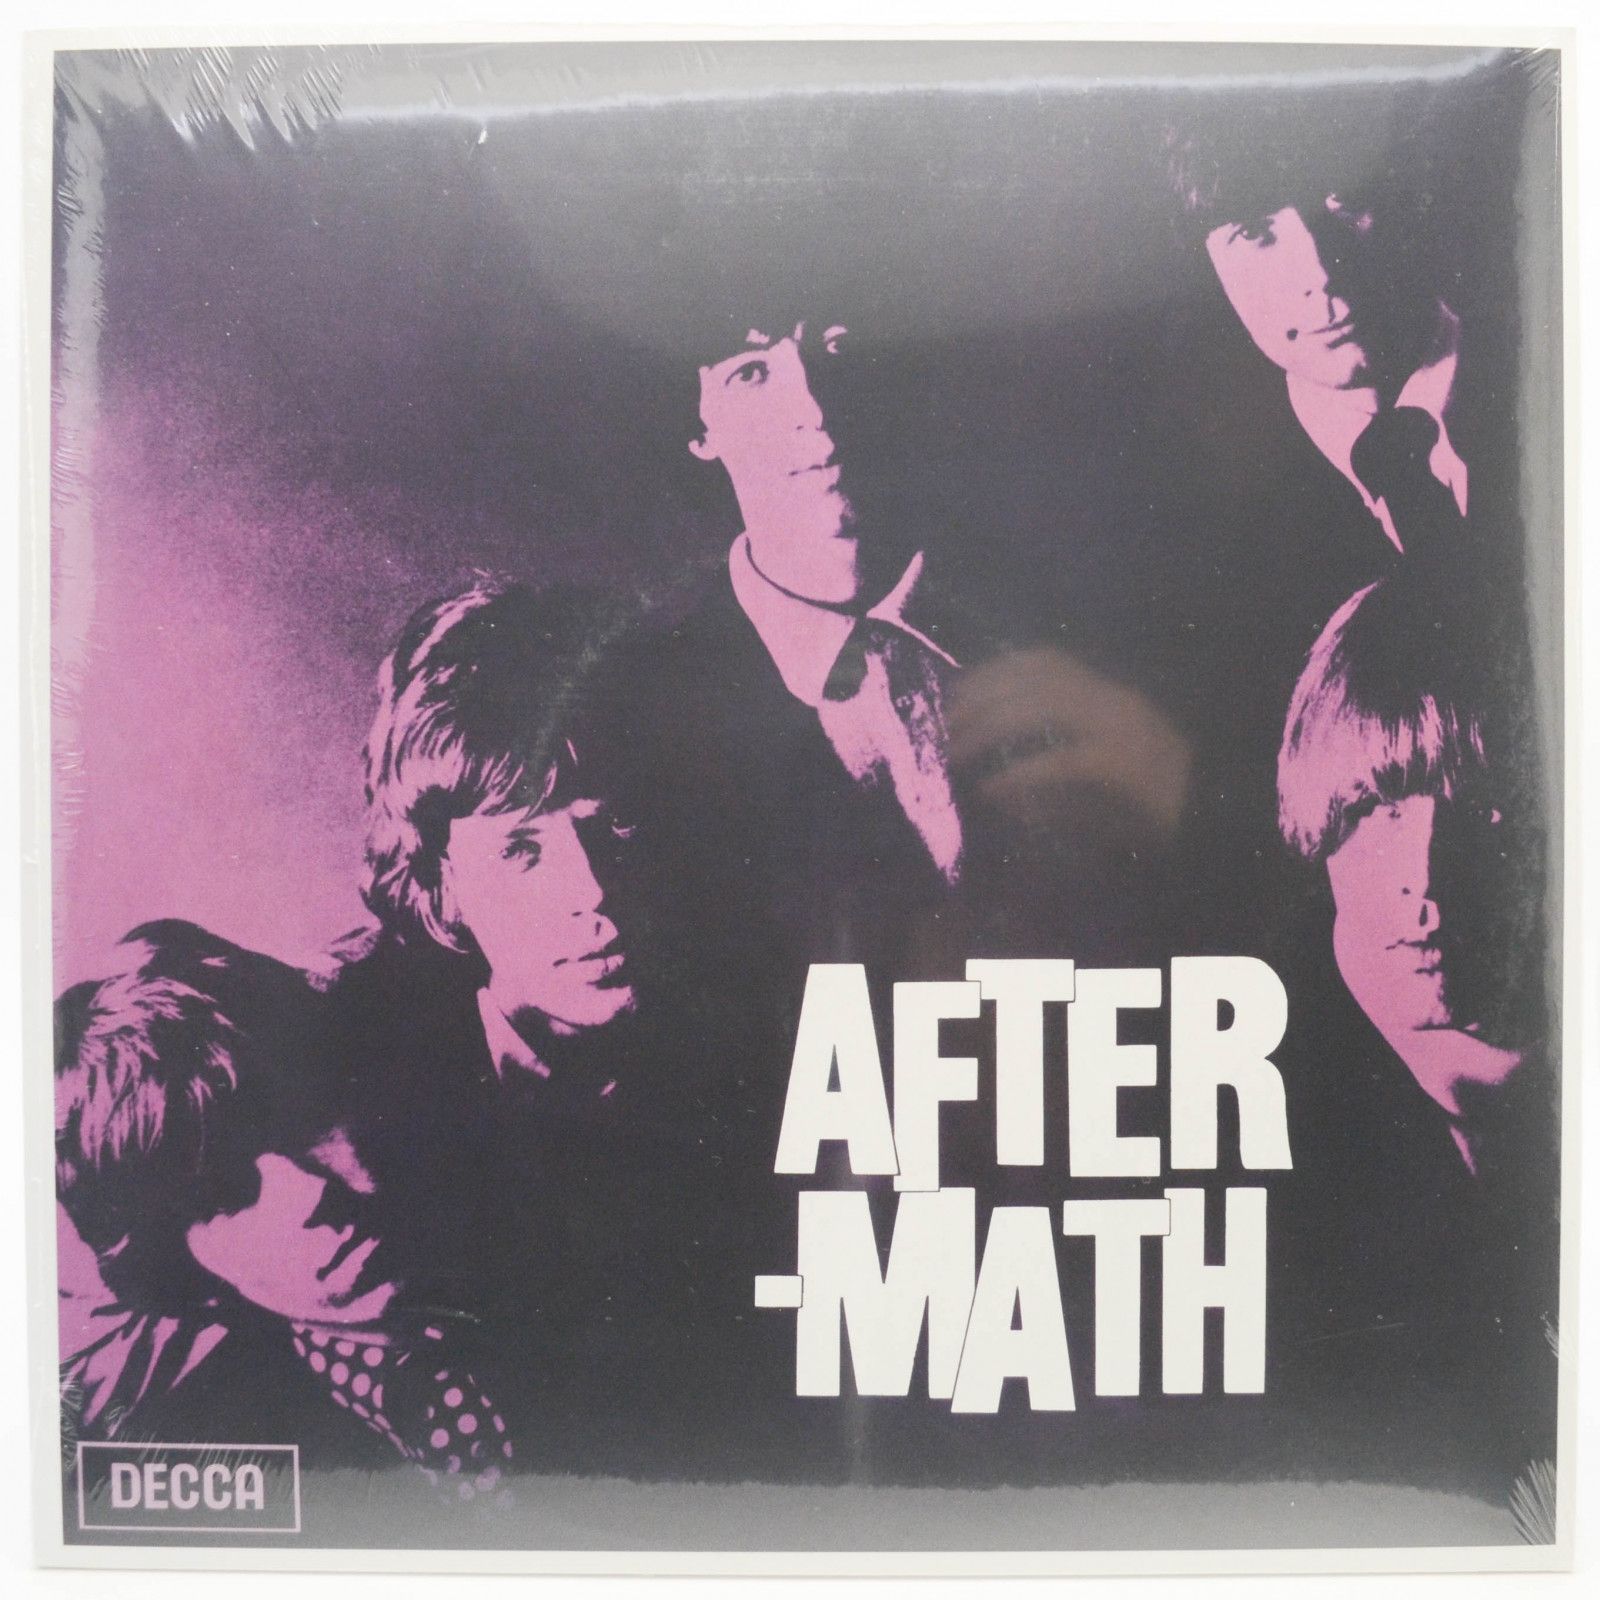 Rolling Stones — Aftermath, 1966